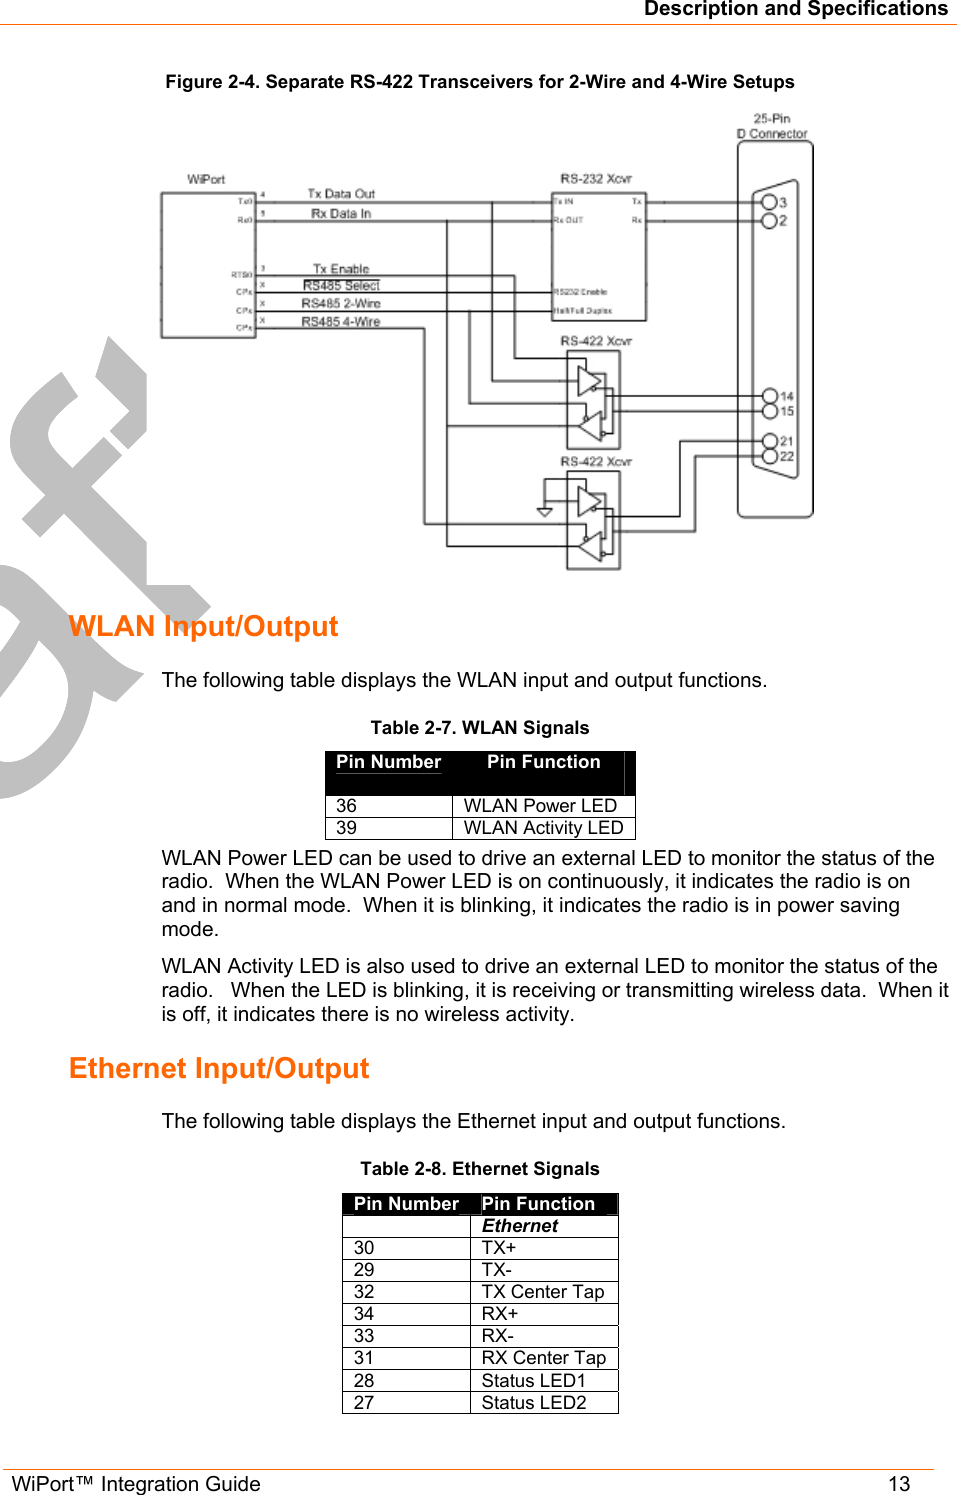 Description and Specifications WiPort™ Integration Guide   13 Figure 2-4. Separate RS-422 Transceivers for 2-Wire and 4-Wire Setups  WLAN Input/Output The following table displays the WLAN input and output functions. Table 2-7. WLAN Signals   Pin Number  Pin Function  36  WLAN Power LED 39  WLAN Activity LED WLAN Power LED can be used to drive an external LED to monitor the status of the radio.  When the WLAN Power LED is on continuously, it indicates the radio is on and in normal mode.  When it is blinking, it indicates the radio is in power saving mode. WLAN Activity LED is also used to drive an external LED to monitor the status of the radio.   When the LED is blinking, it is receiving or transmitting wireless data.  When it is off, it indicates there is no wireless activity. Ethernet Input/Output The following table displays the Ethernet input and output functions.   Table 2-8. Ethernet Signals   Pin Number  Pin Function  Ethernet 30 TX+ 29 TX- 32  TX Center Tap 34 RX+ 33 RX- 31  RX Center Tap 28 Status LED1 27 Status LED2 